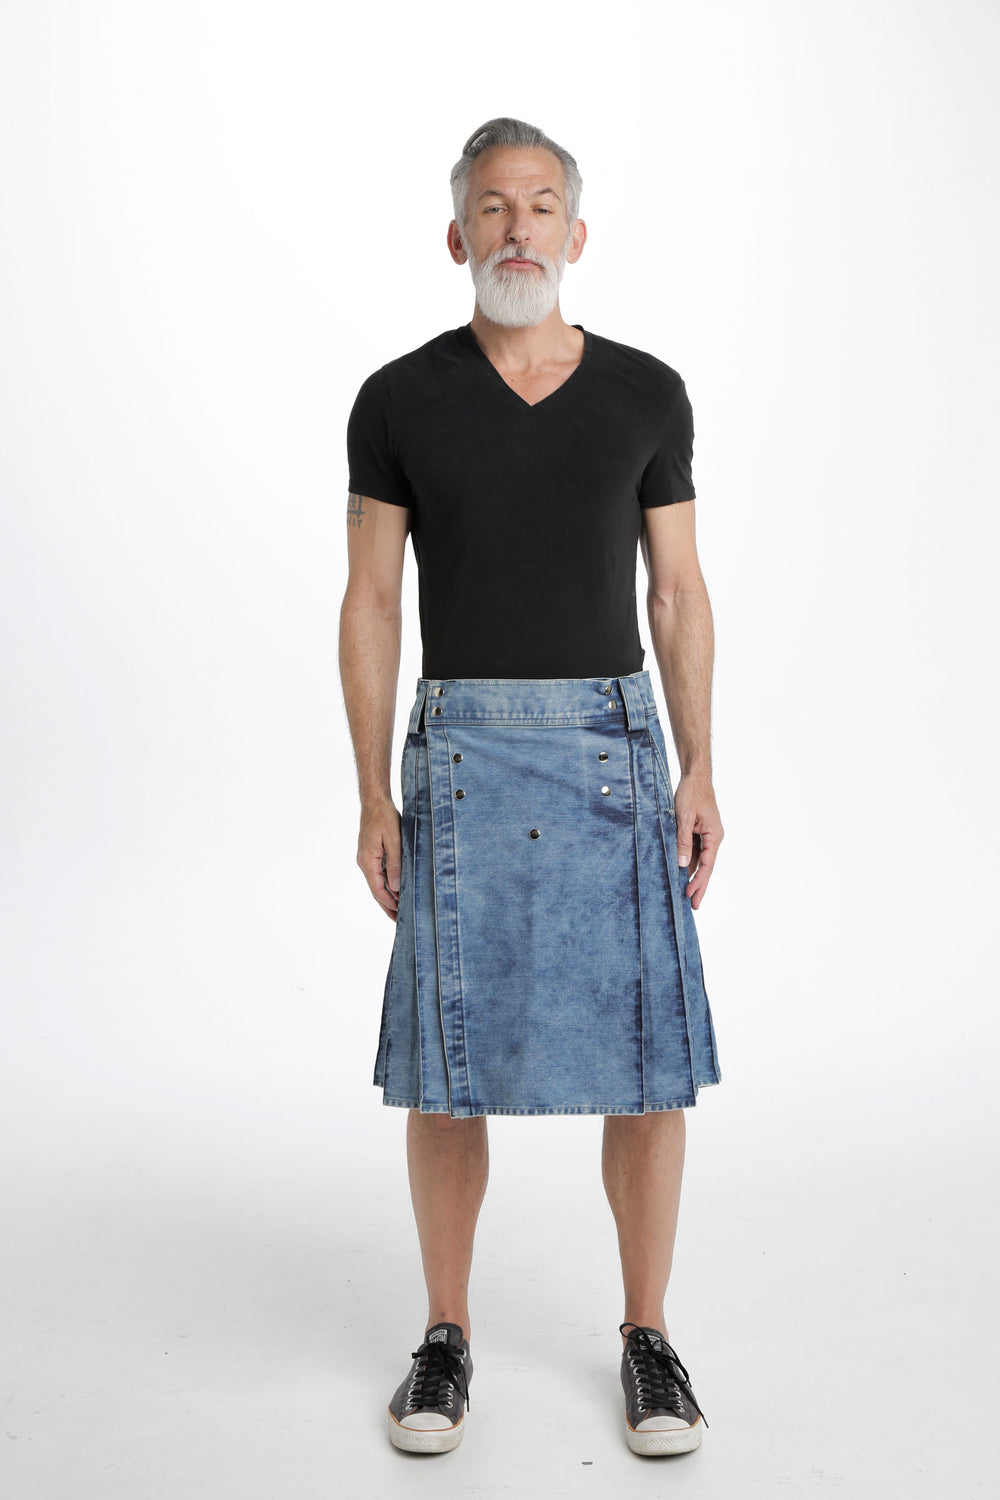 The Denim Utility Kilt will let you change up your casual wardrobe by allowing you to change out your favorite pair of denim jeans for your new favorite, equally-as-casual and comfortable kilt.